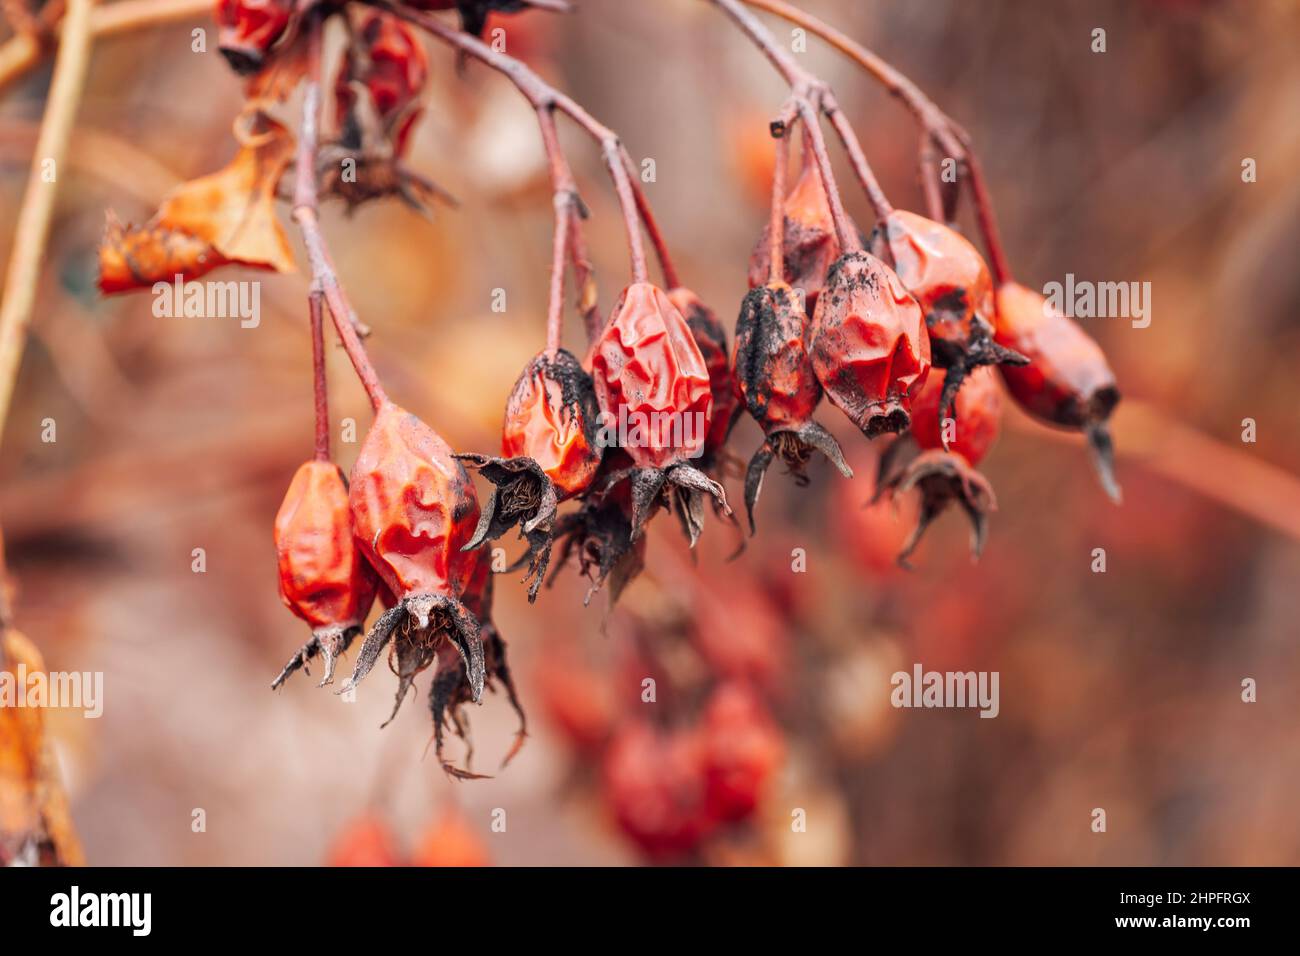 Closeup of twig of rose hip full of old berries of red color with dark spots on blurred background. Healthy plant for making tee and treatment Stock Photo